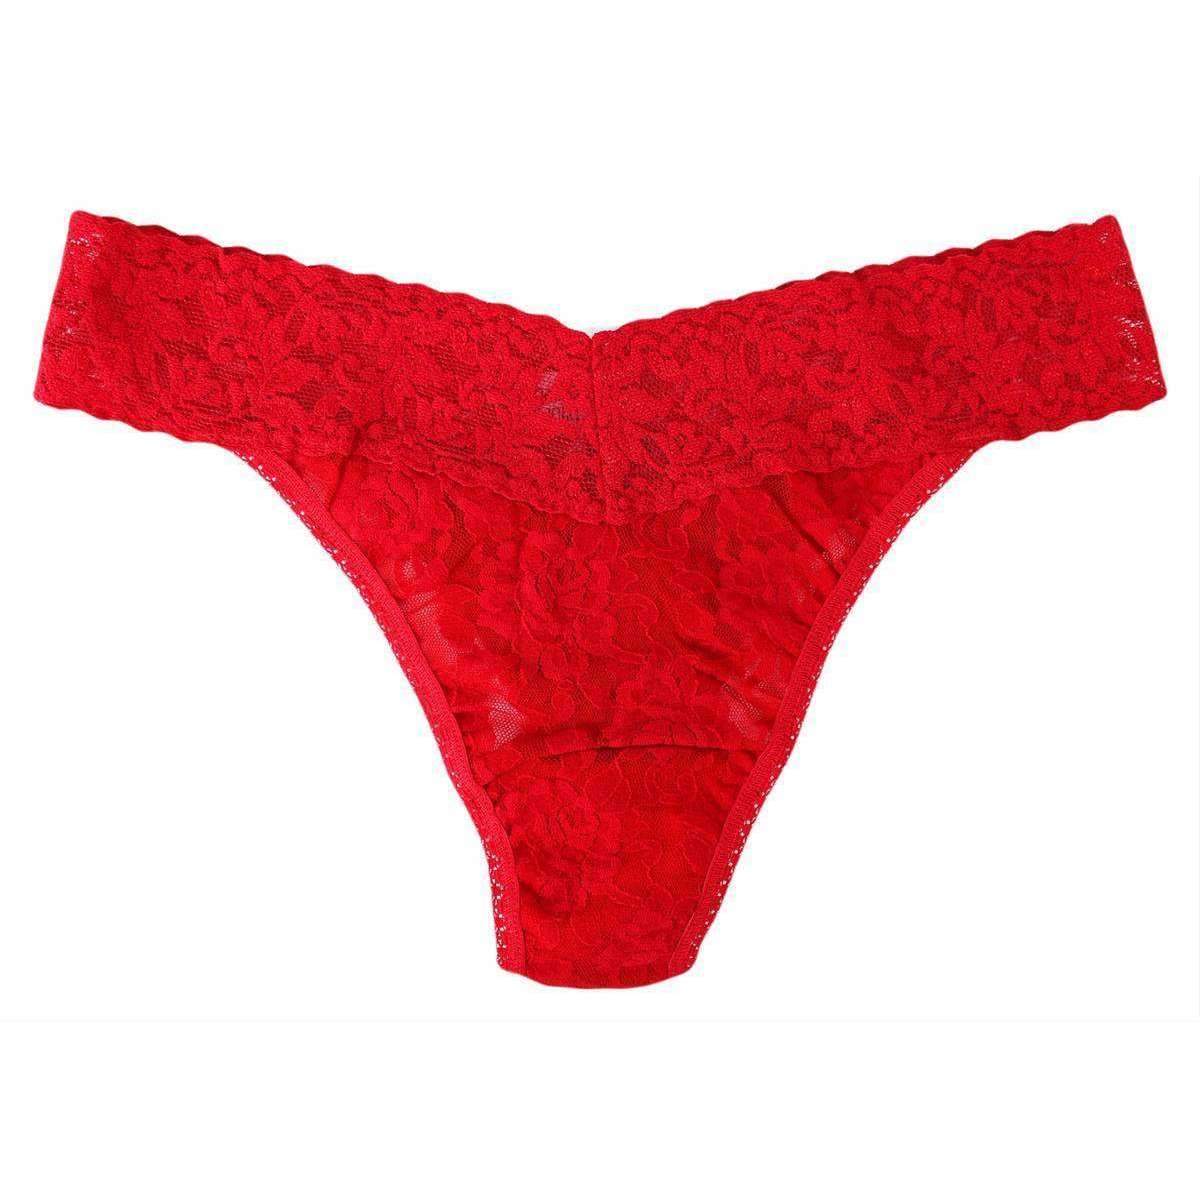 Tropical Trim Thong Panty in Red Bandana  Lace thong panties, Bandana  lace, Red bandana